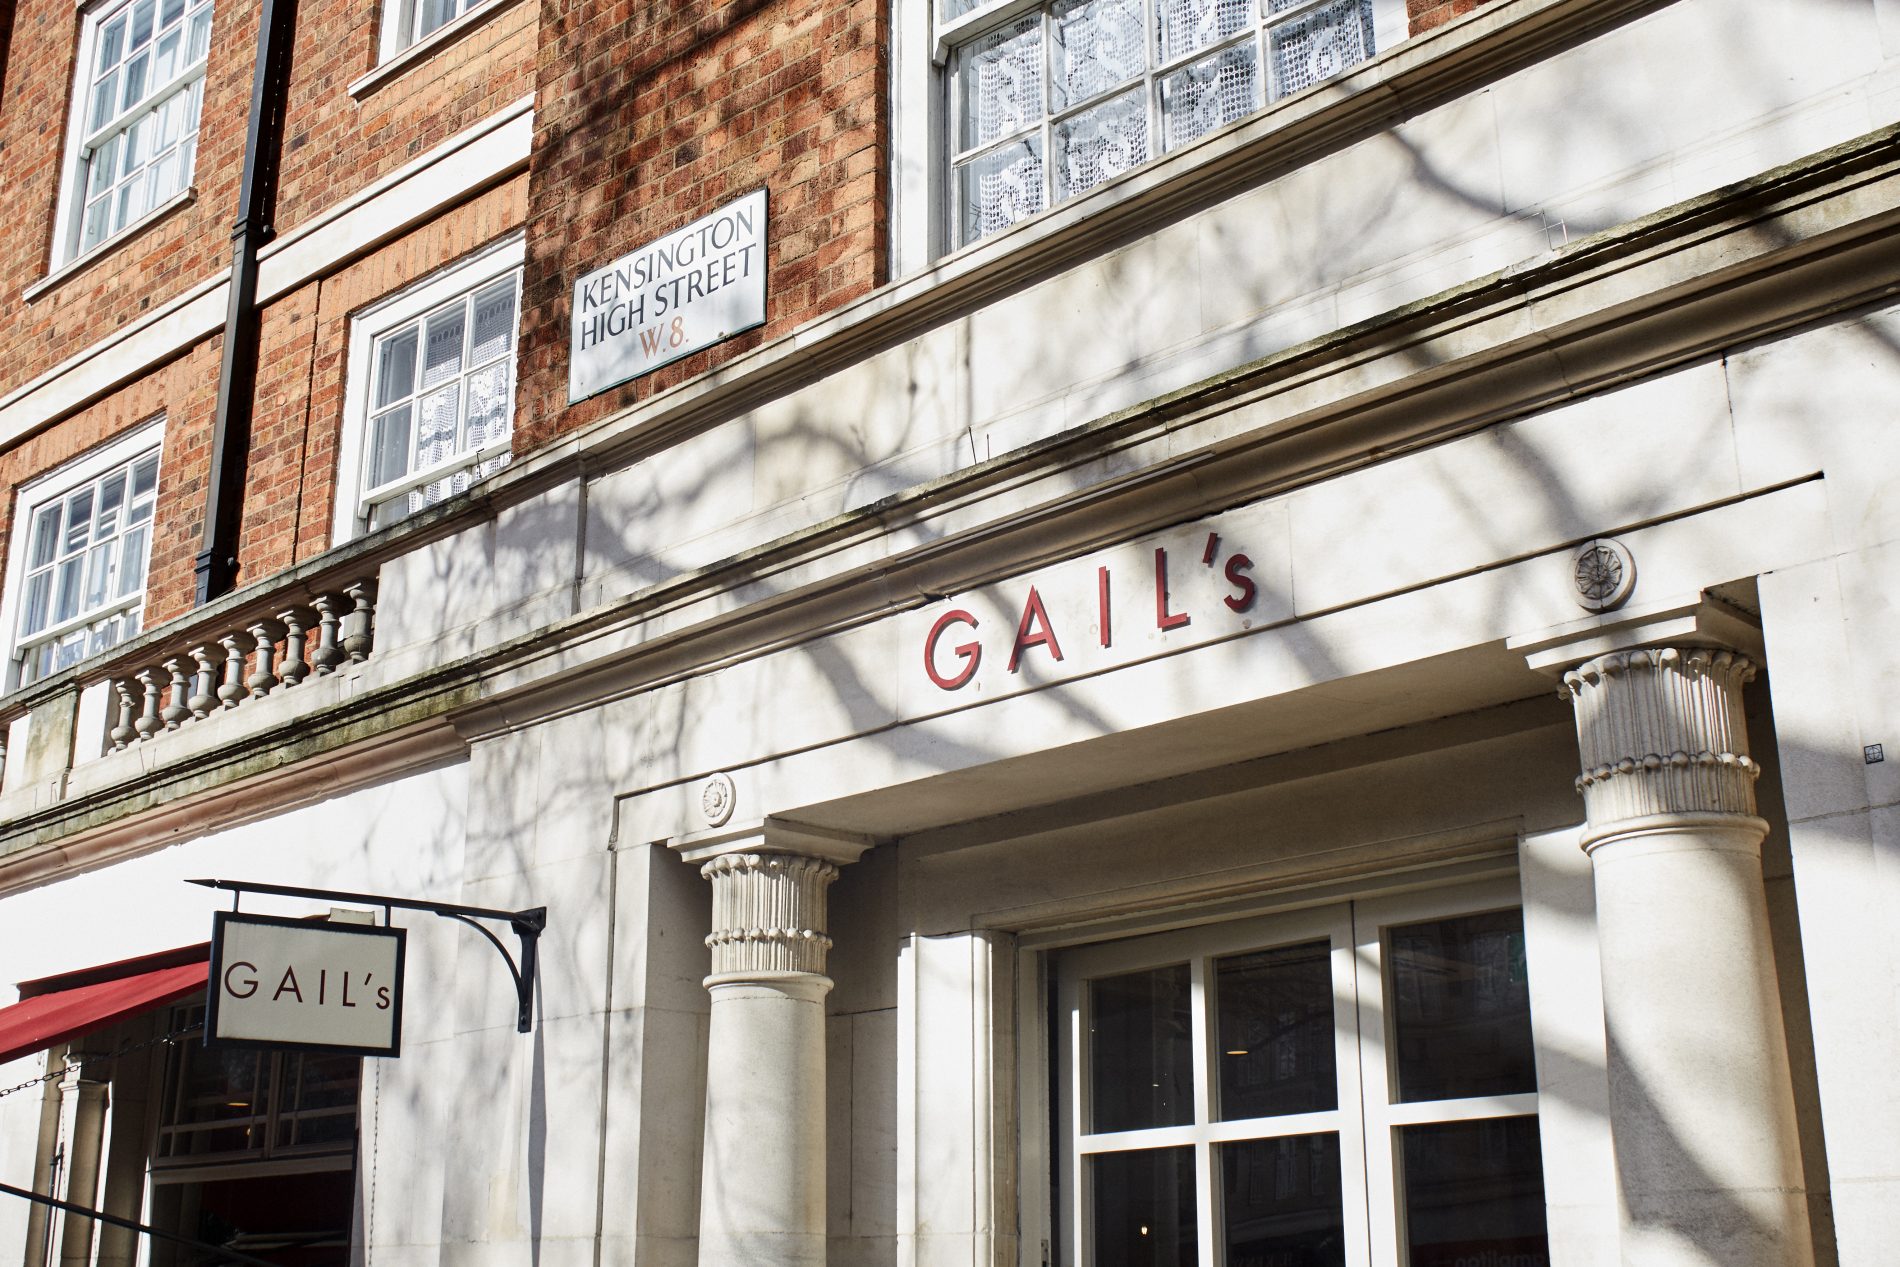 Tunsgate Quarter Welcomes Gail's Bakery to Scheme